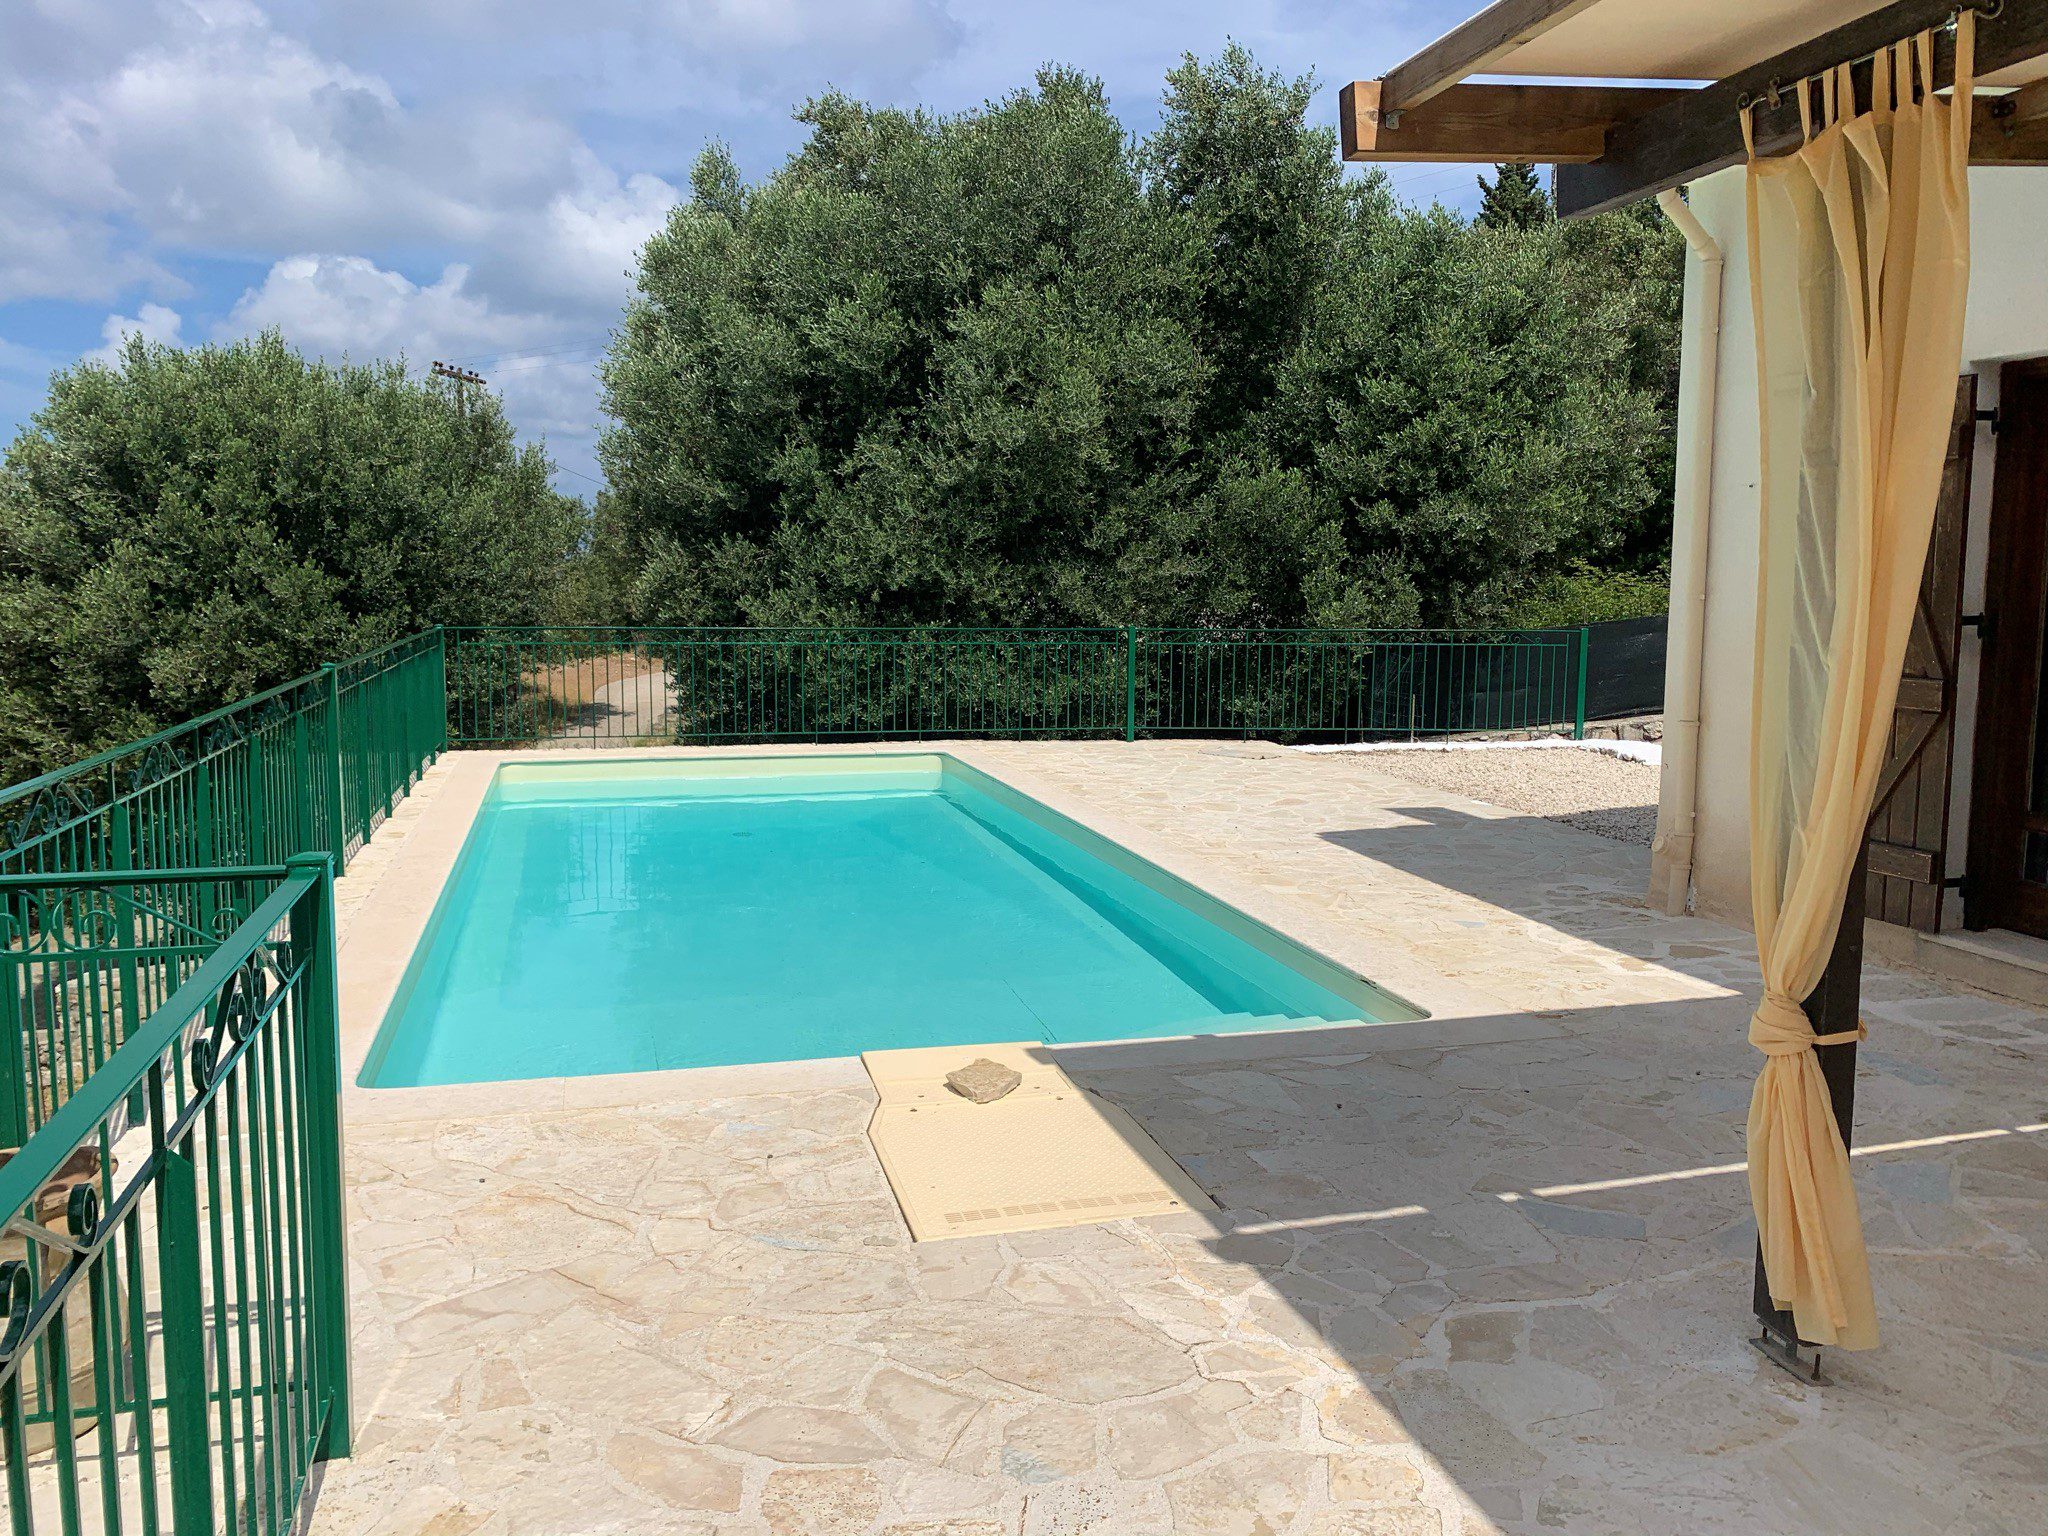 Swimming pool area of property for sale on Ithaca Greece, Lefki